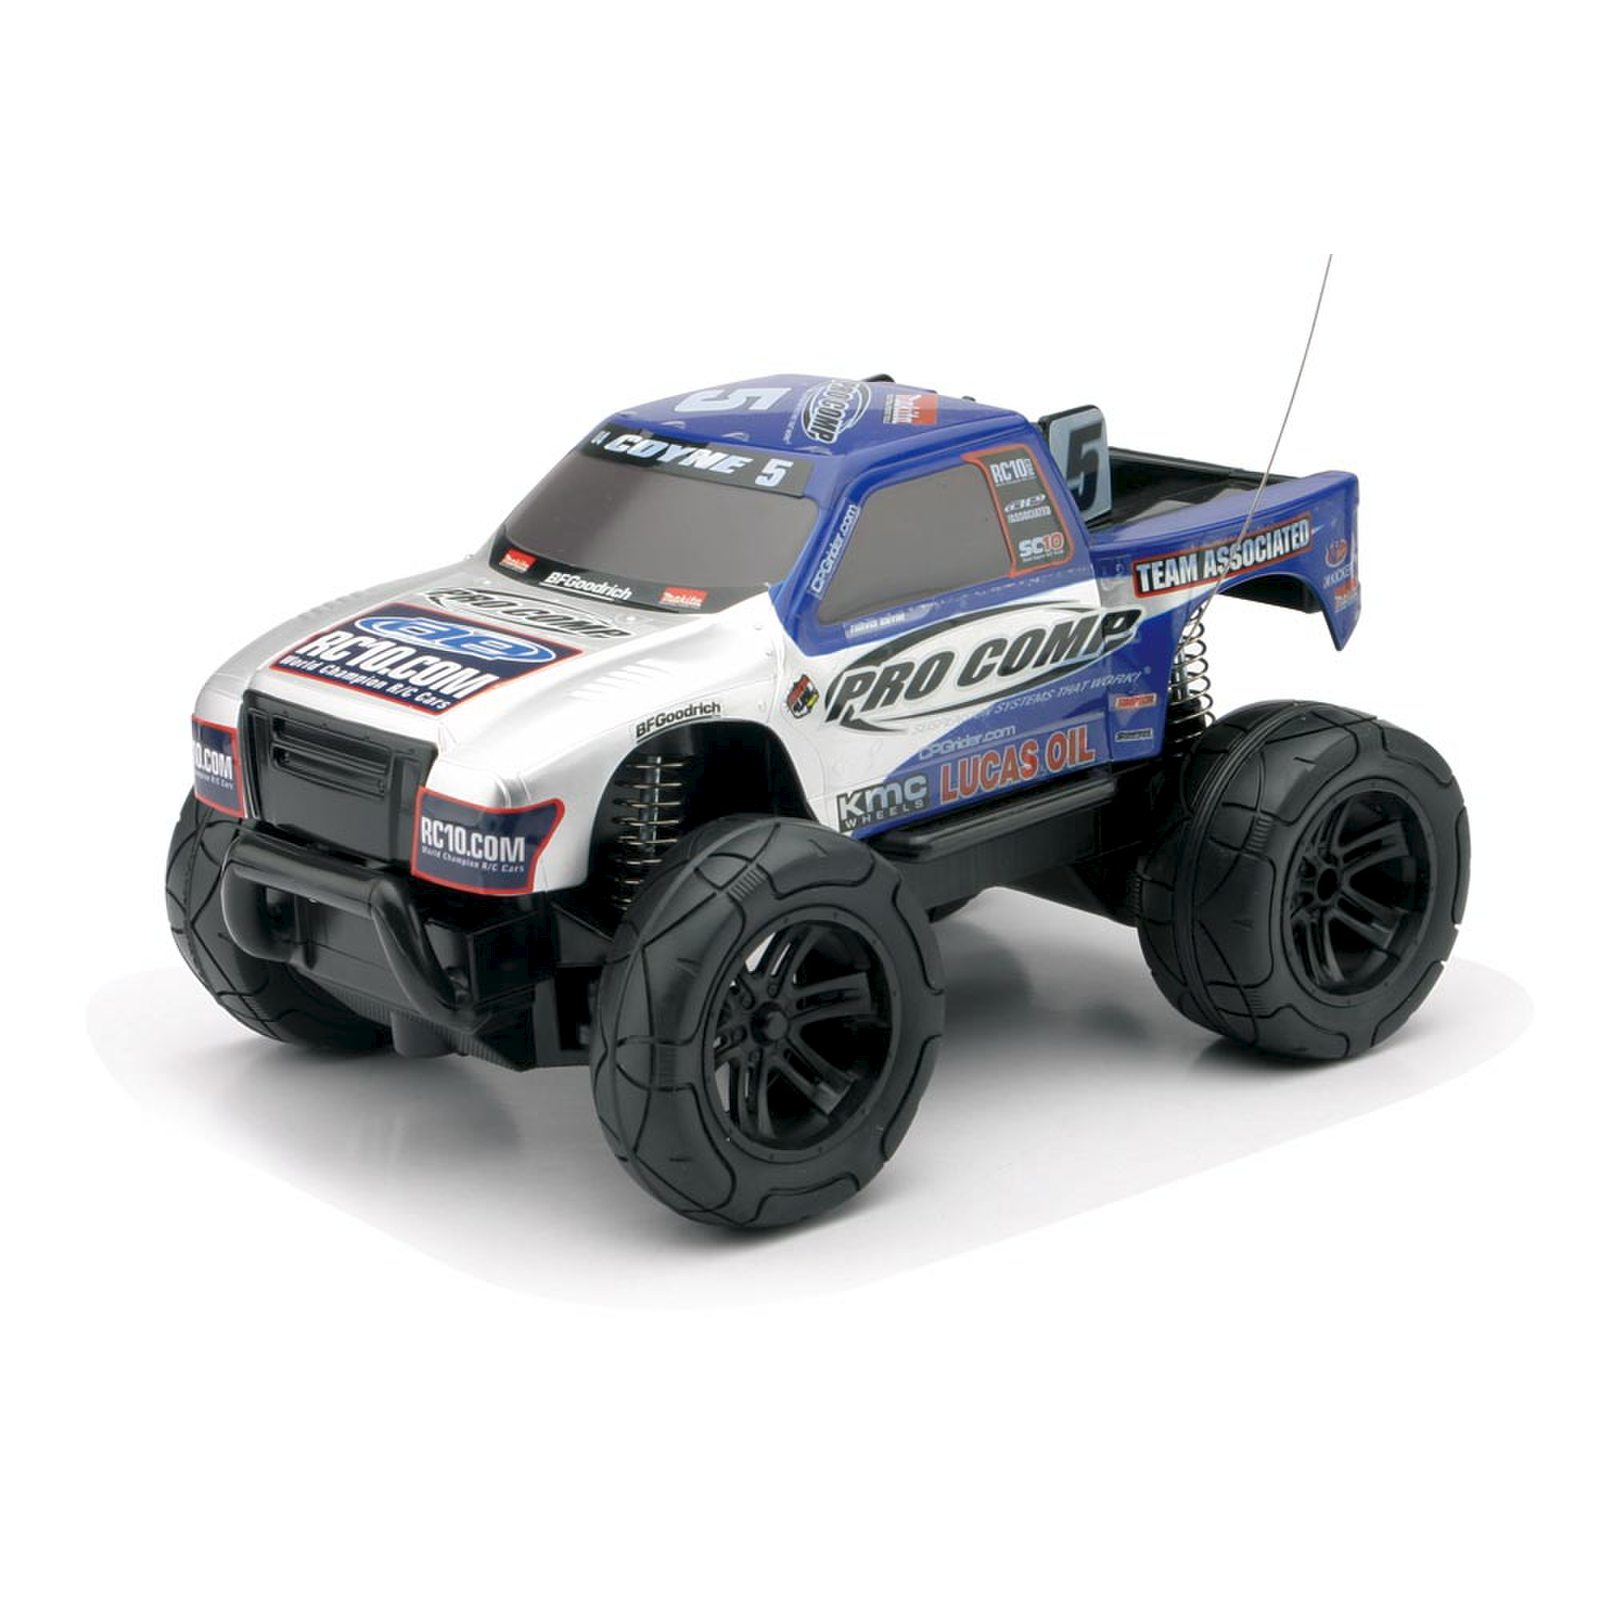 Radio Controlled off Road Truck Scale 1:20 RC Toy Truck 93577886139 | eBay